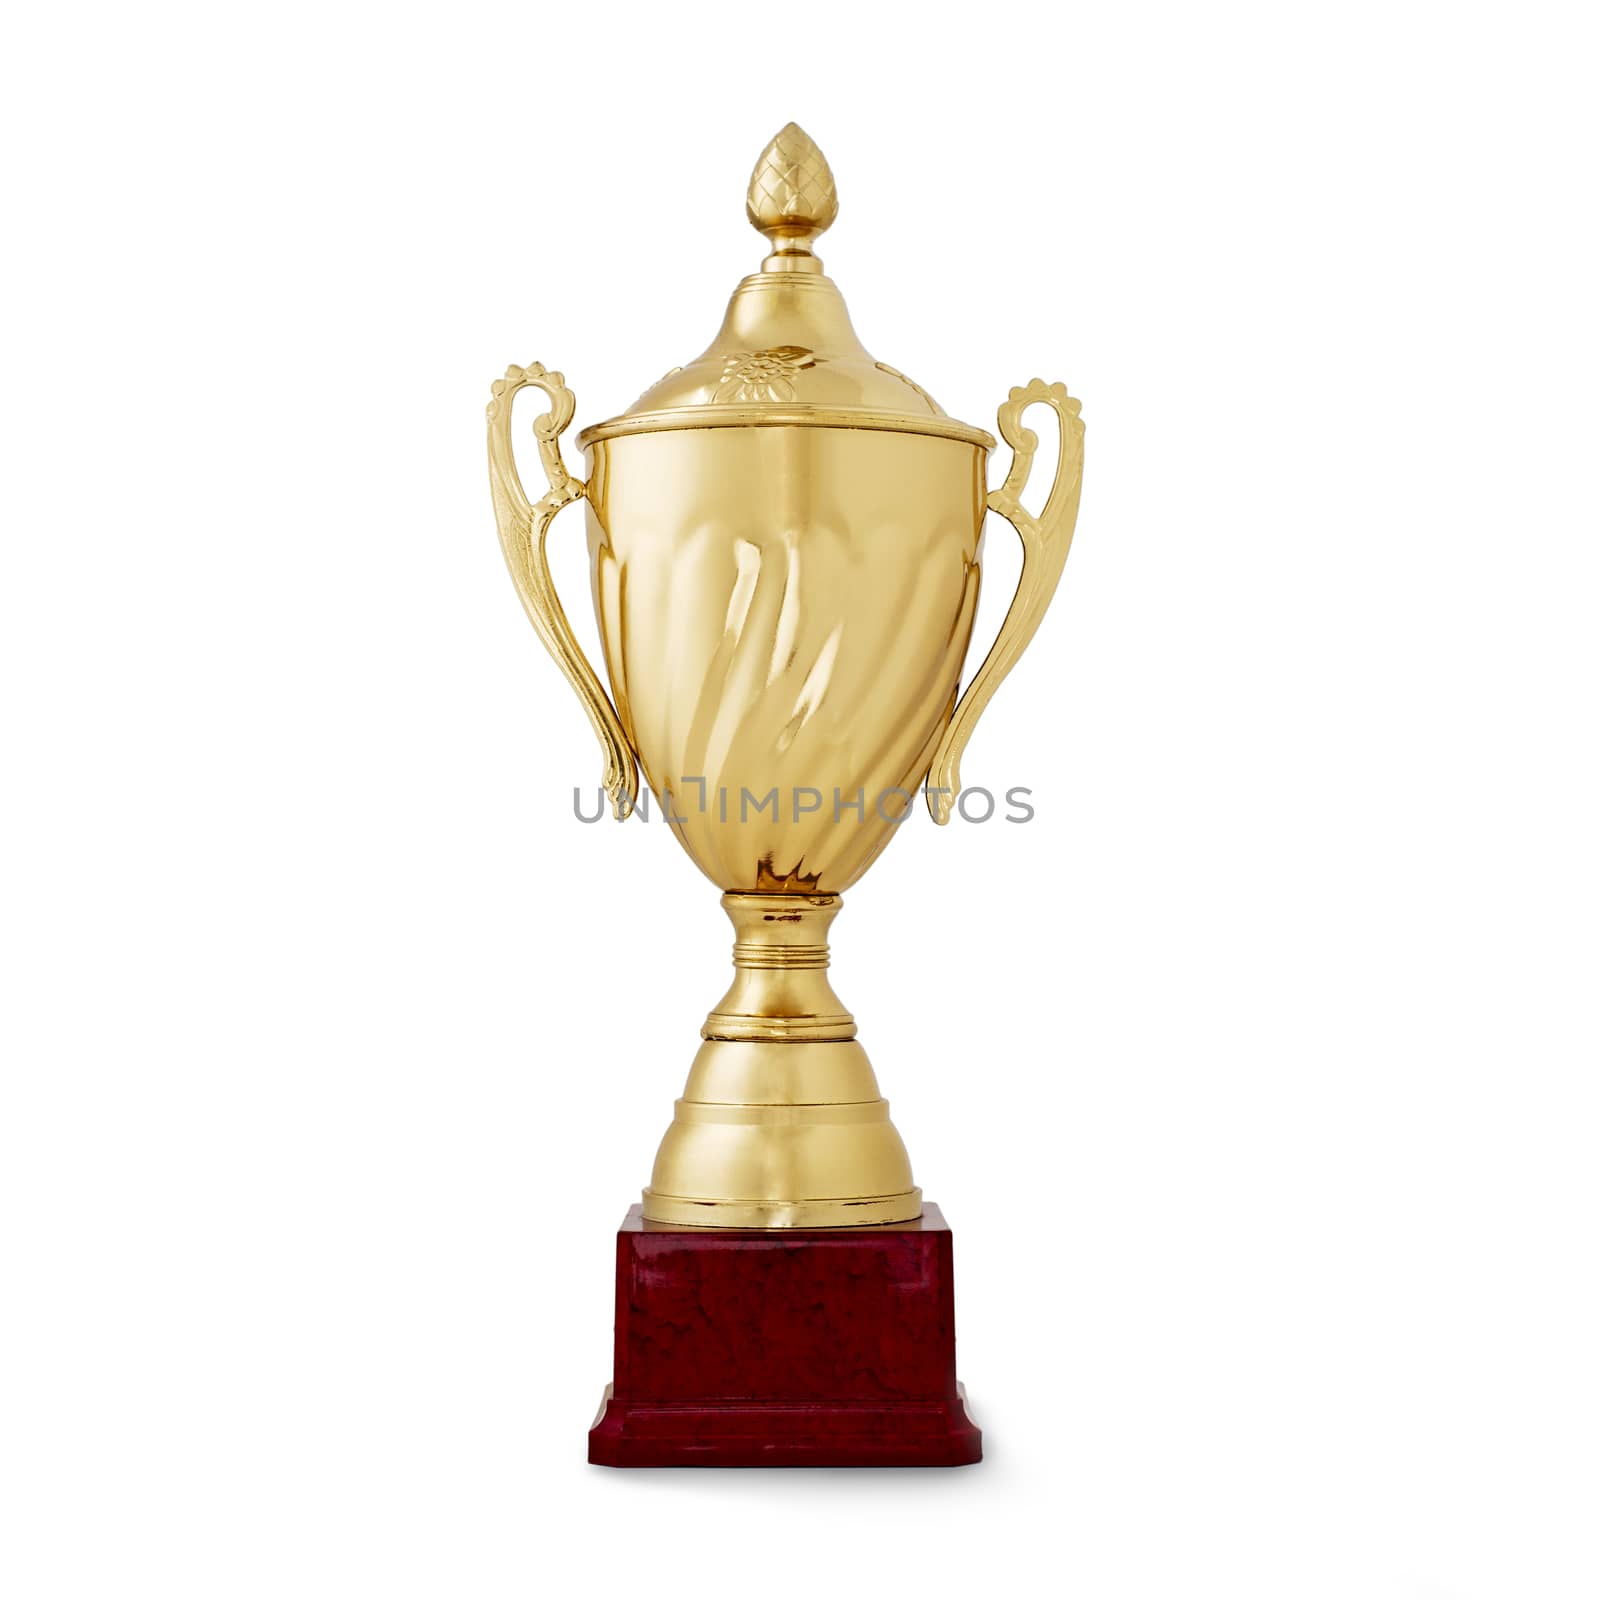 Close-up of a golden shiny cup, reward for the winner of a competition, on white background